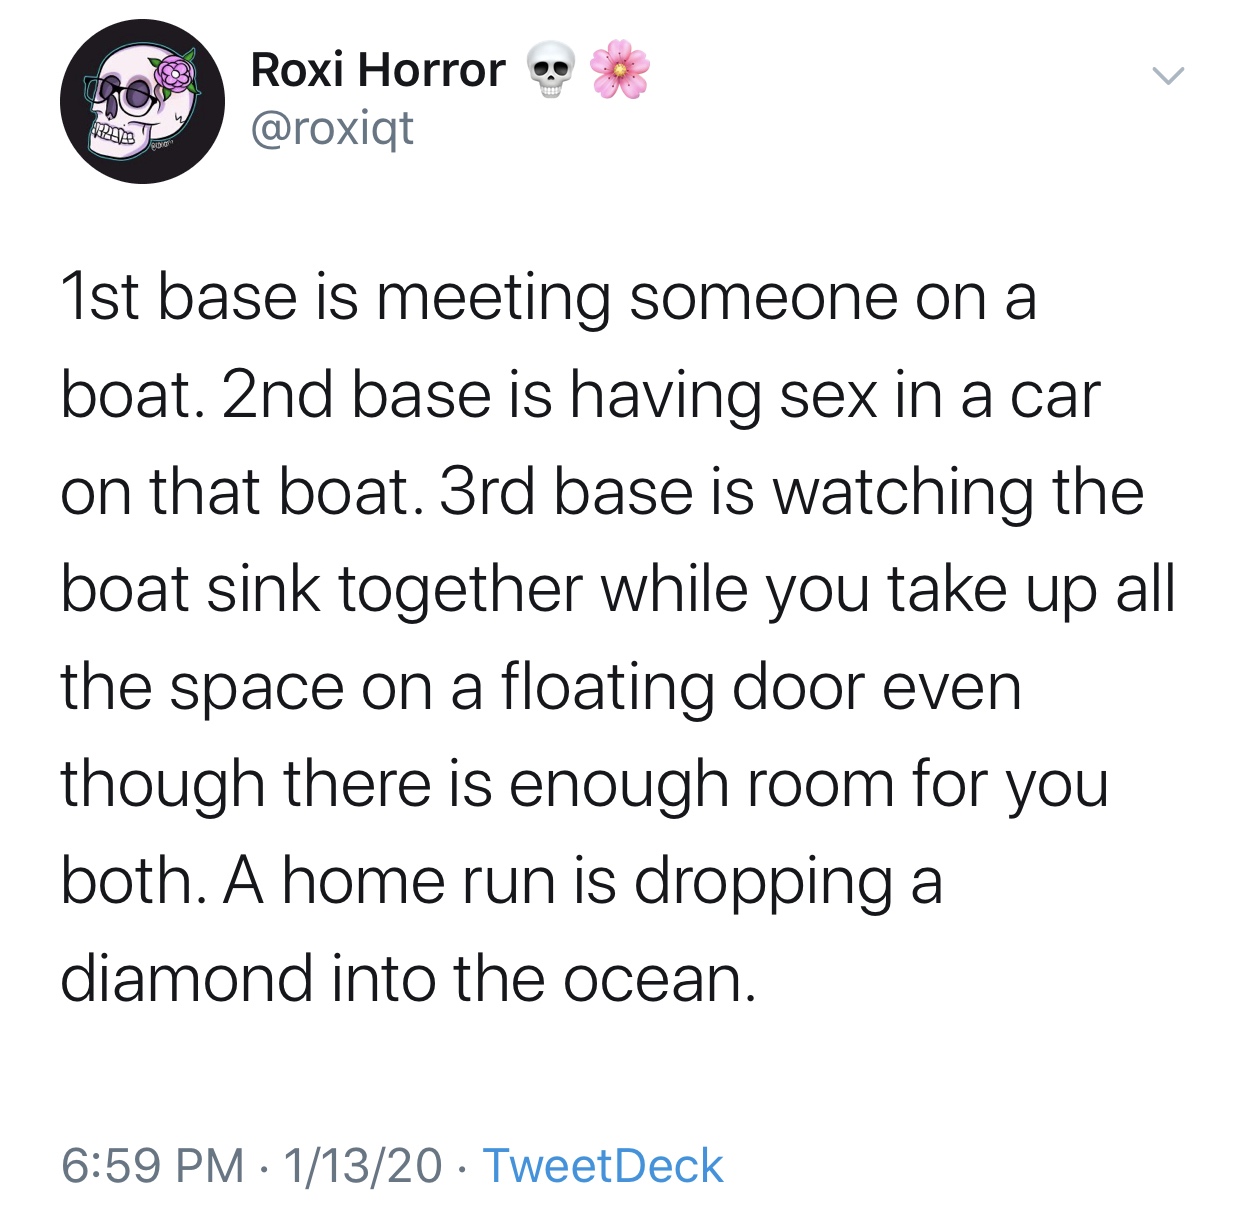 my mom called me son of a bitch - Store Roxi Horror 1st base is meeting someone on a boat. 2nd base is having sex in a car on that boat. 3rd base is watching the boat sink together while you take up all the space on a floating door even though there is en